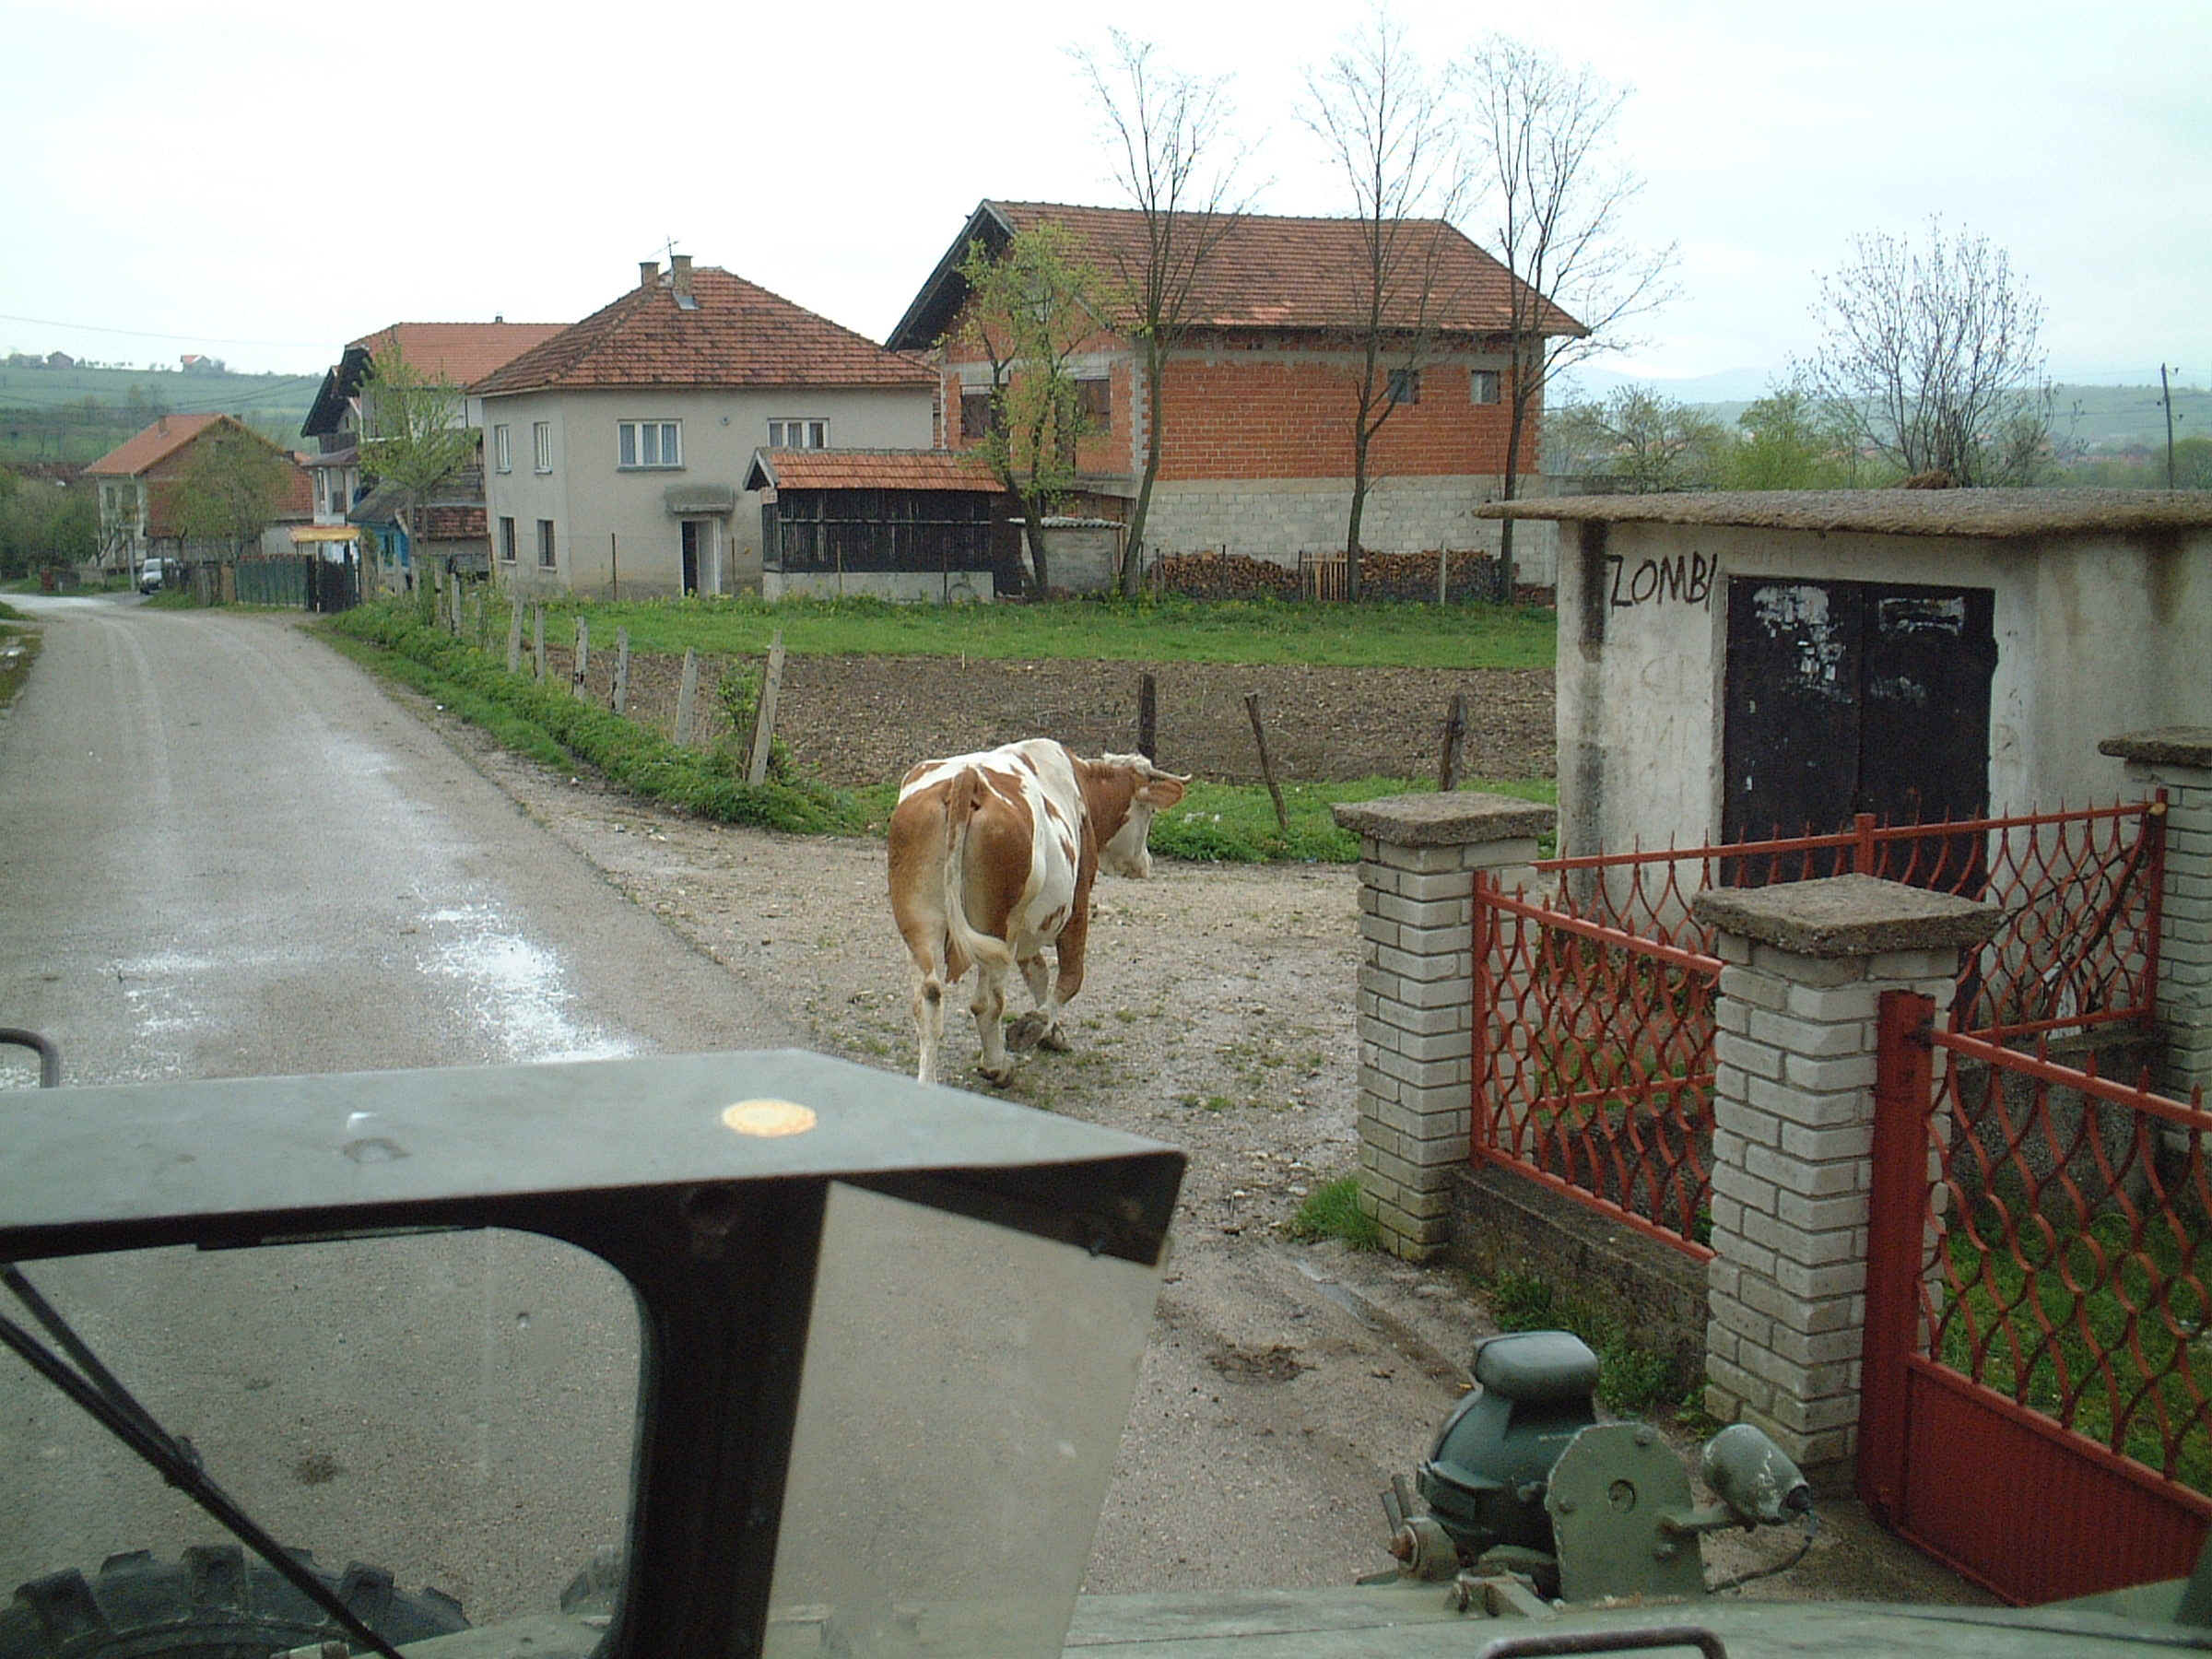 Cow out for a walk.JPG (780234 bytes)